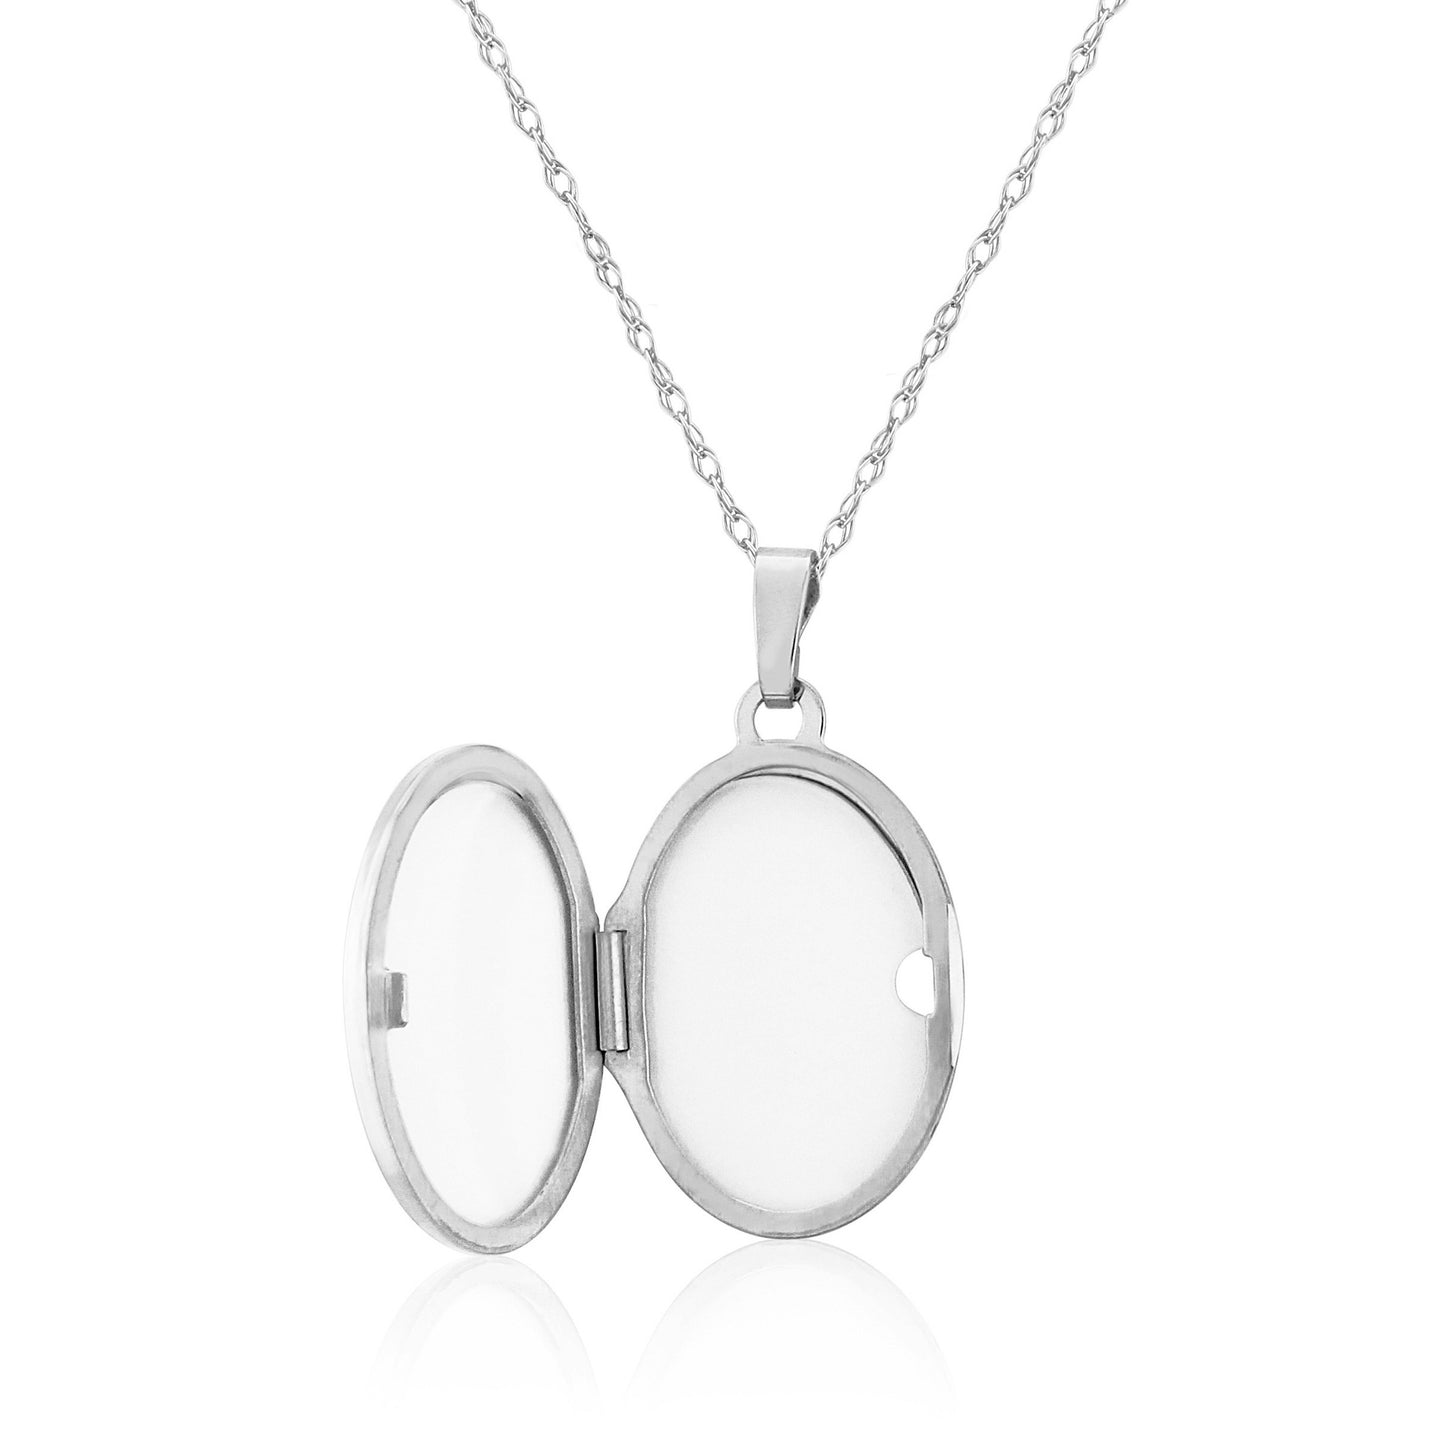 Sterling Silver Mother of Pearl Locket Necklace